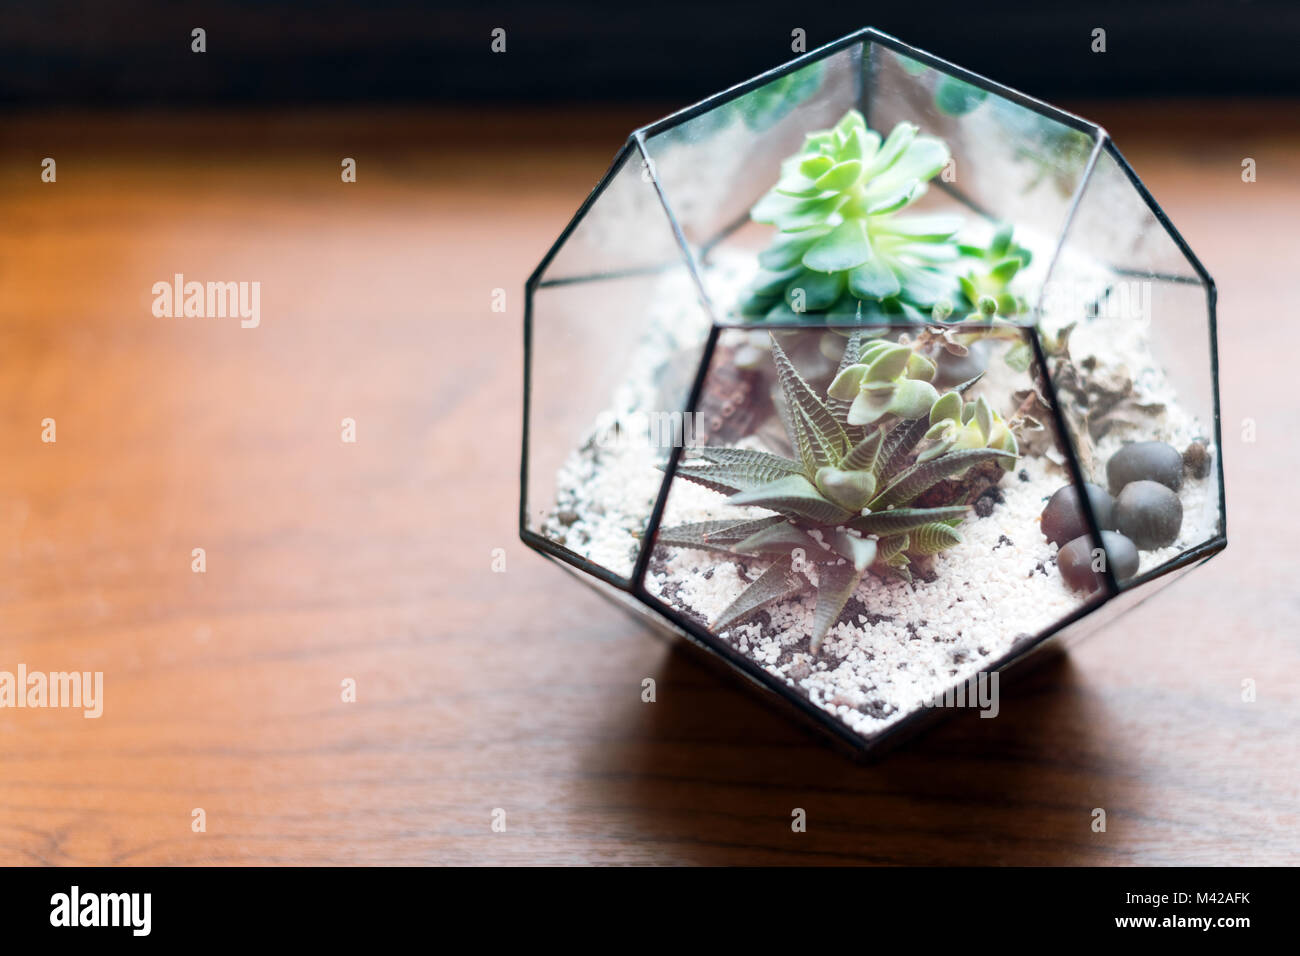 Mini succulent garden in glass terrarium on wooden windowsill. Succulents with sand and rocks in glass box. Home decoration elements Stock Photo